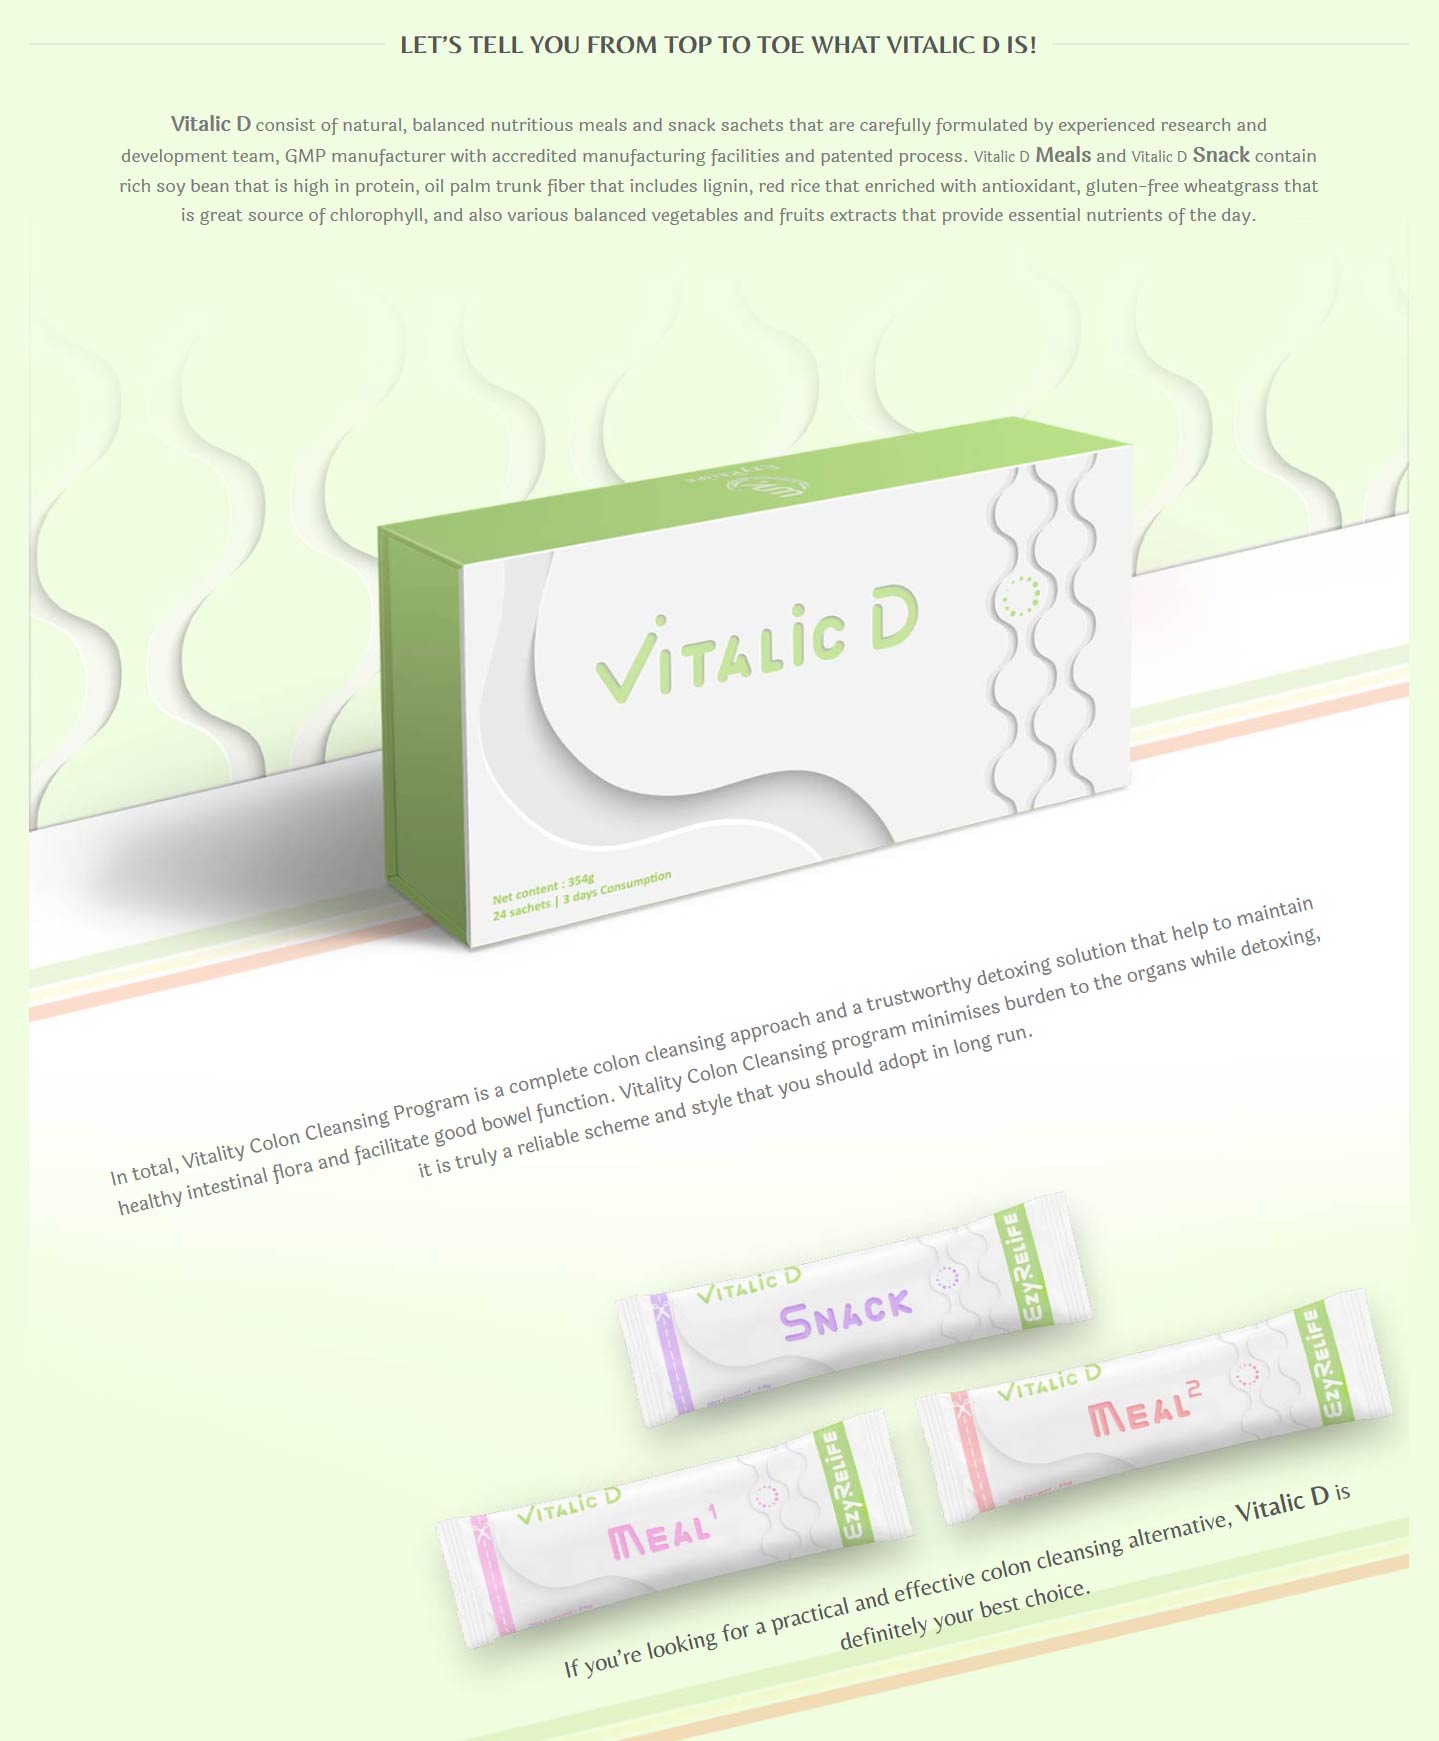 If you’re looking for a practical and effective colon cleansing alternative, Vitalic D is definitely your best choice.